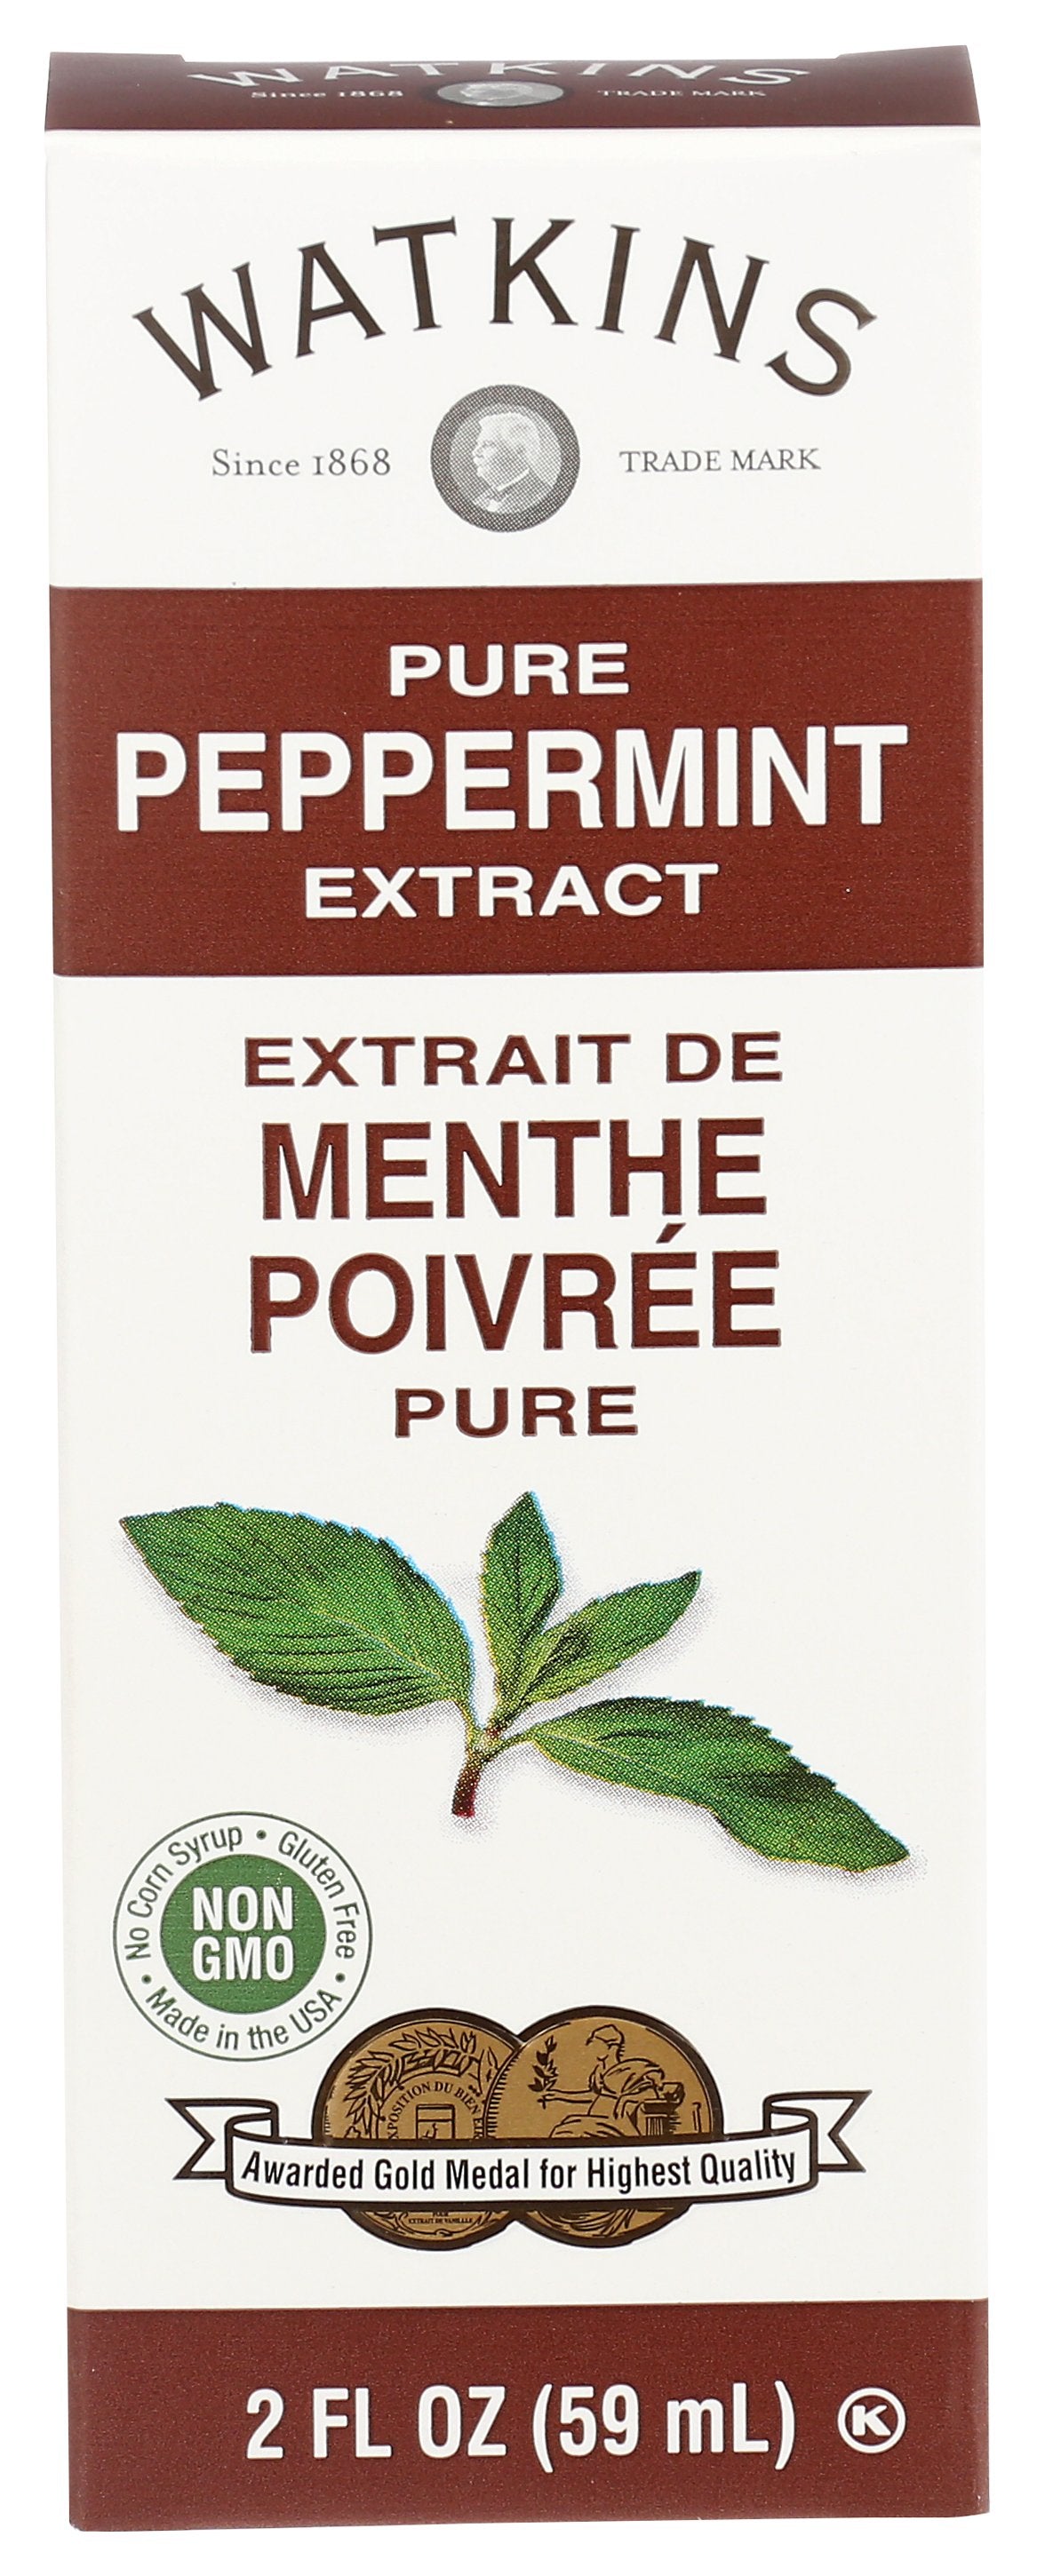 WATKINS EXTRACT PEPPERMINT - Case of 6